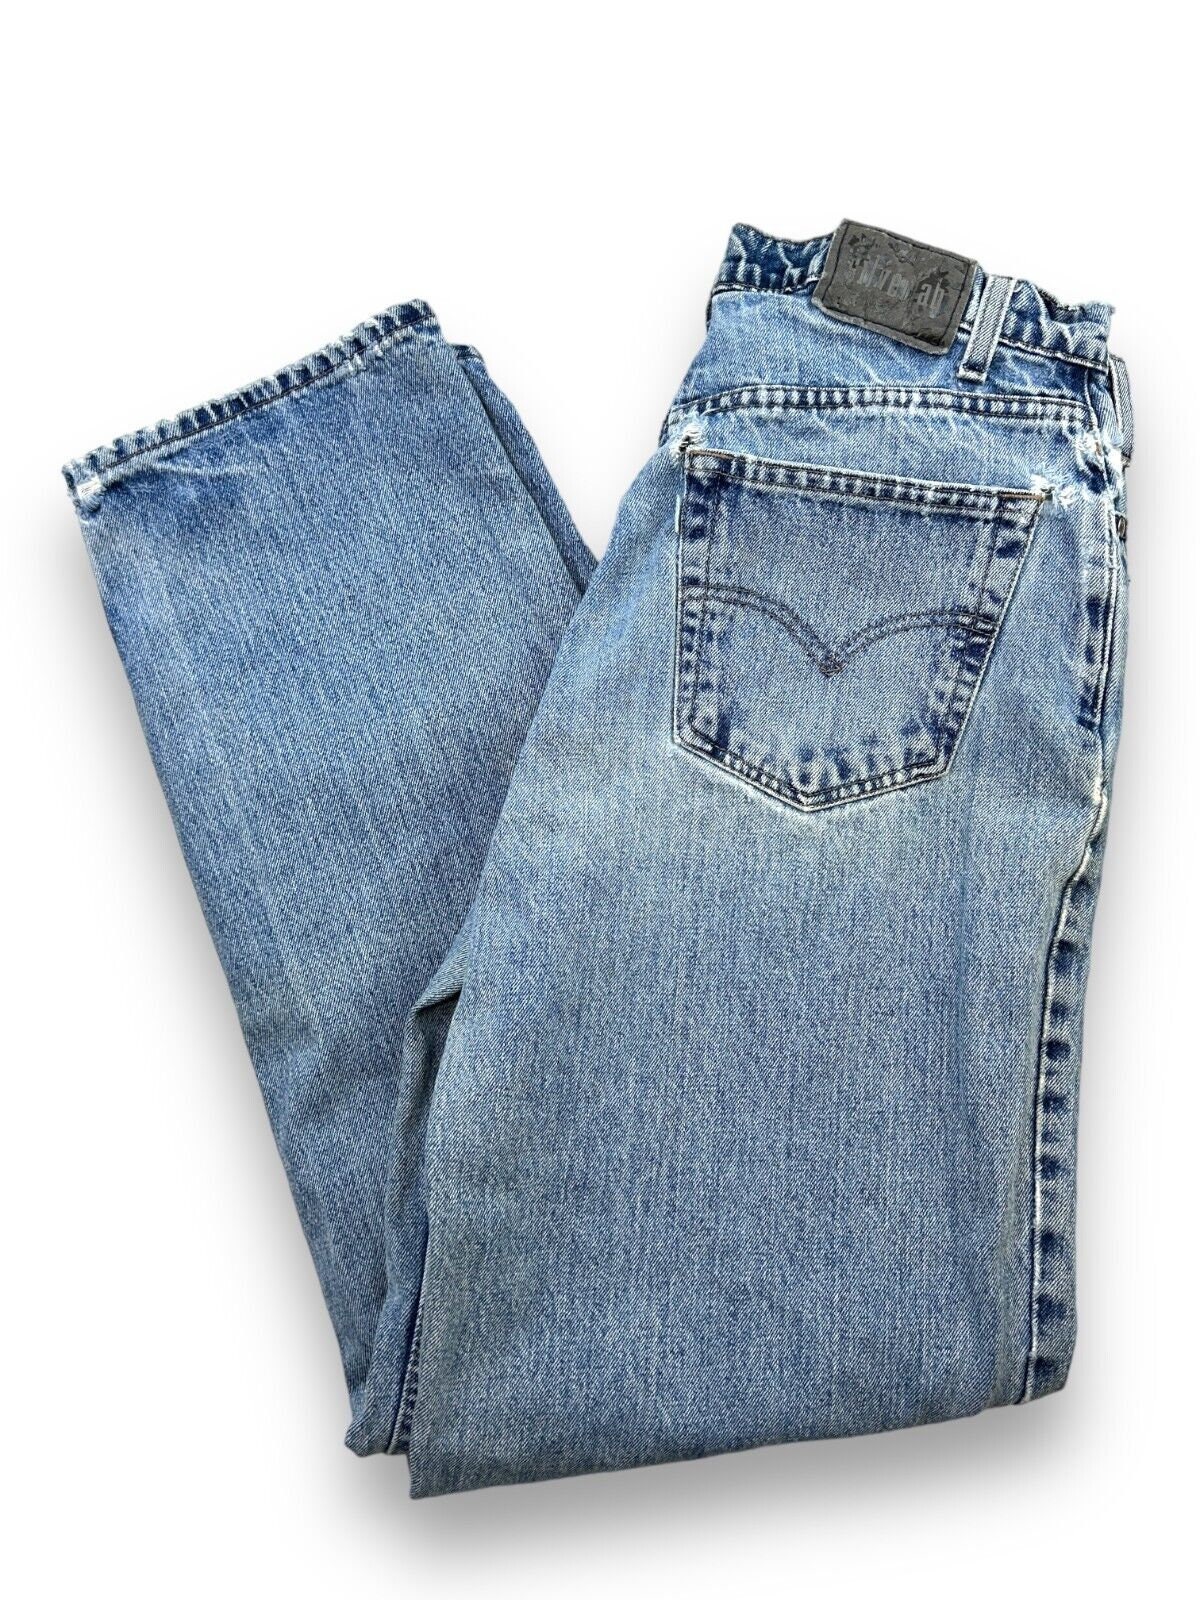 Silver Tab Jeans 90s - Etsy Canada